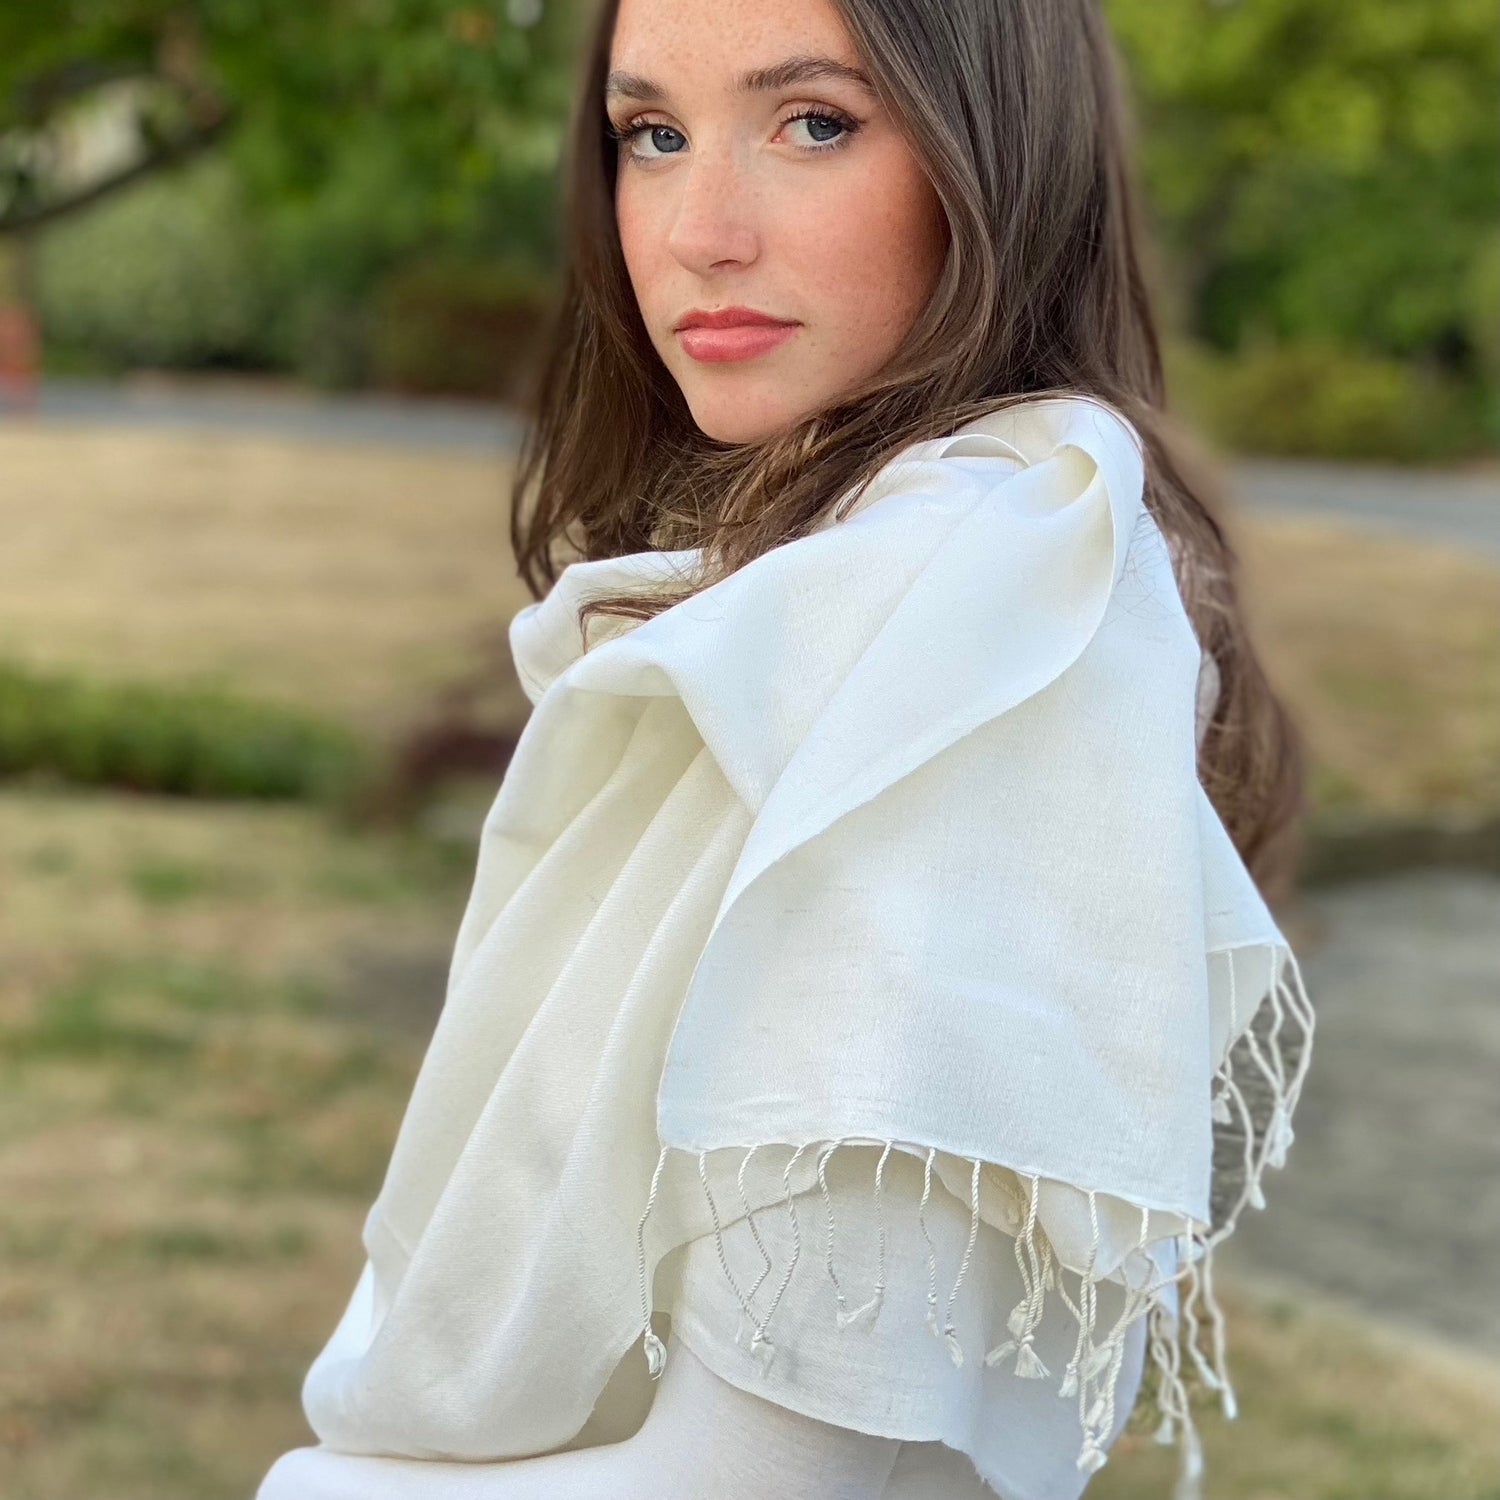 Our luxurious cashmere and pashmina garments are hand-woven in Nepal and carefully wrapped in an elegant organza bag for delivery.